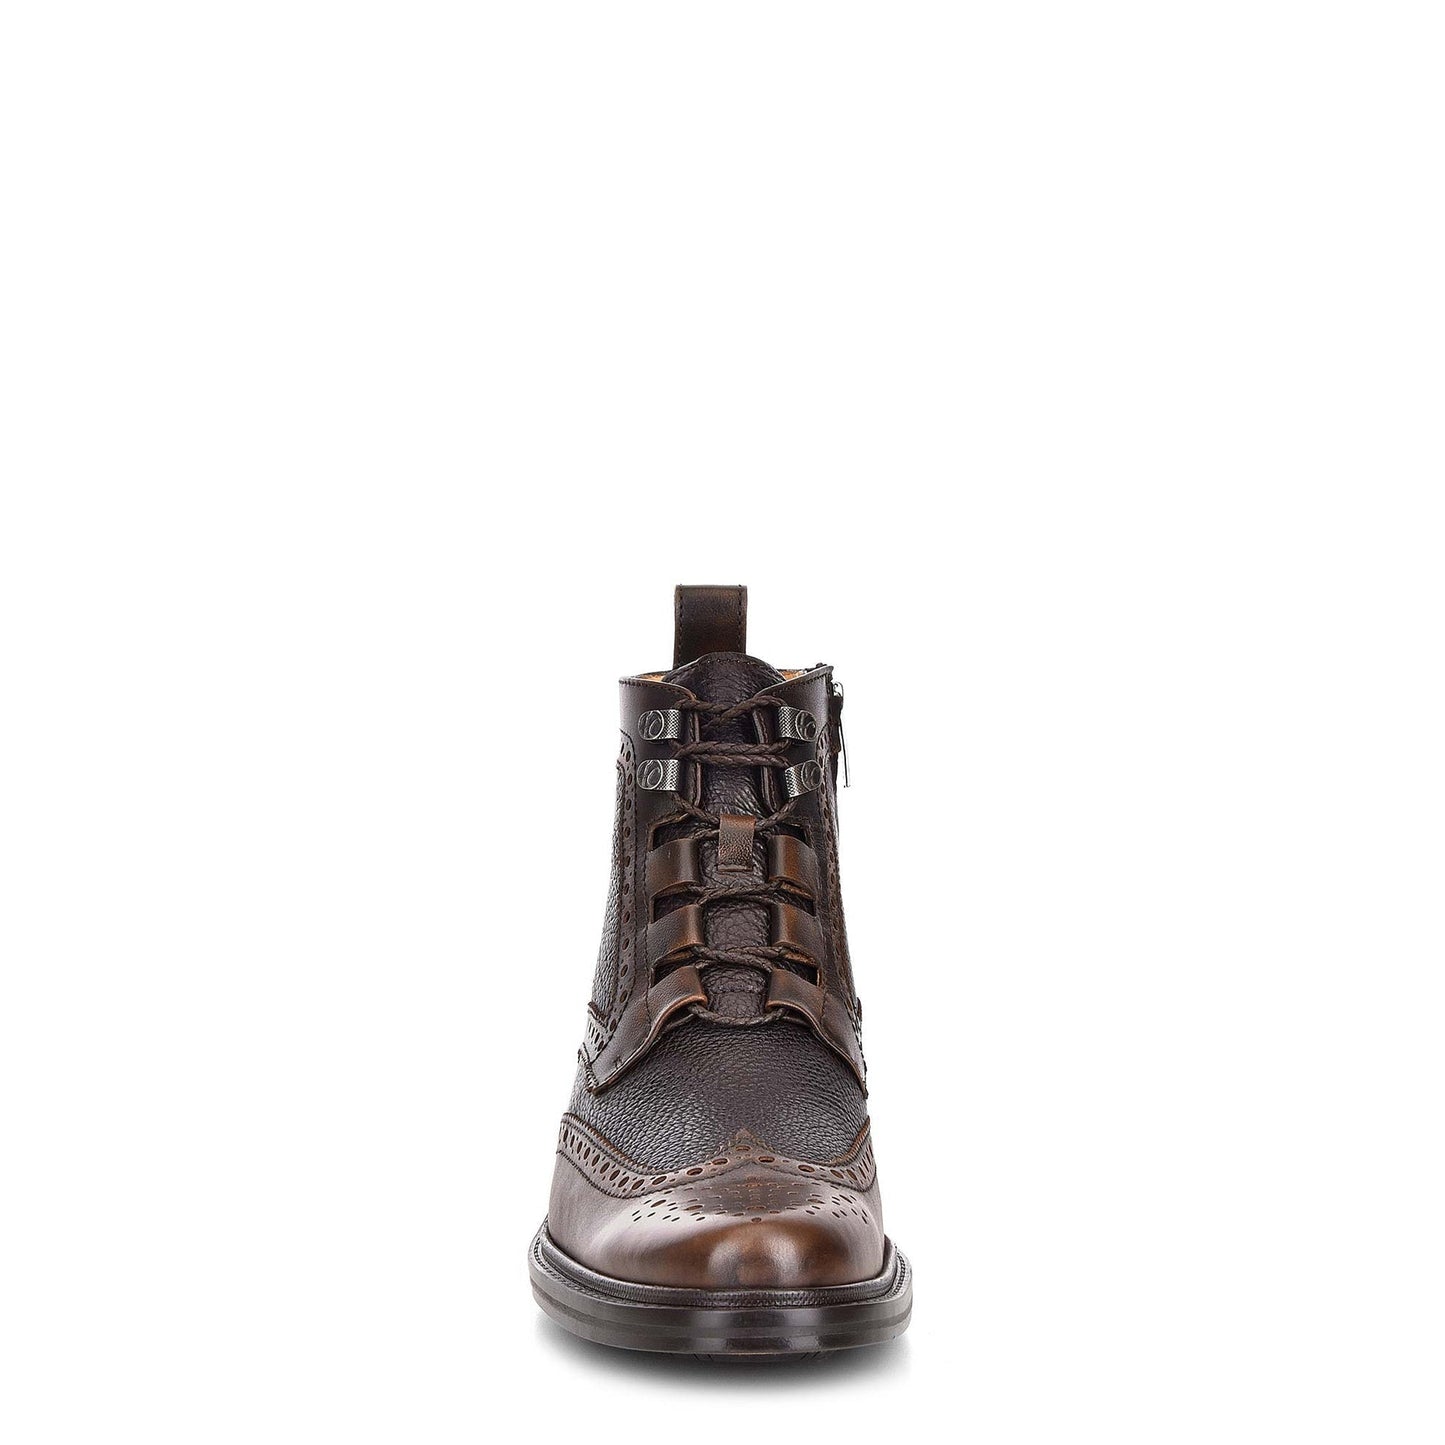 G82EVKB - Cuadra brown casual fashion leather ankle booties for men-CUADRA-Kuet-Cuadra-Boots